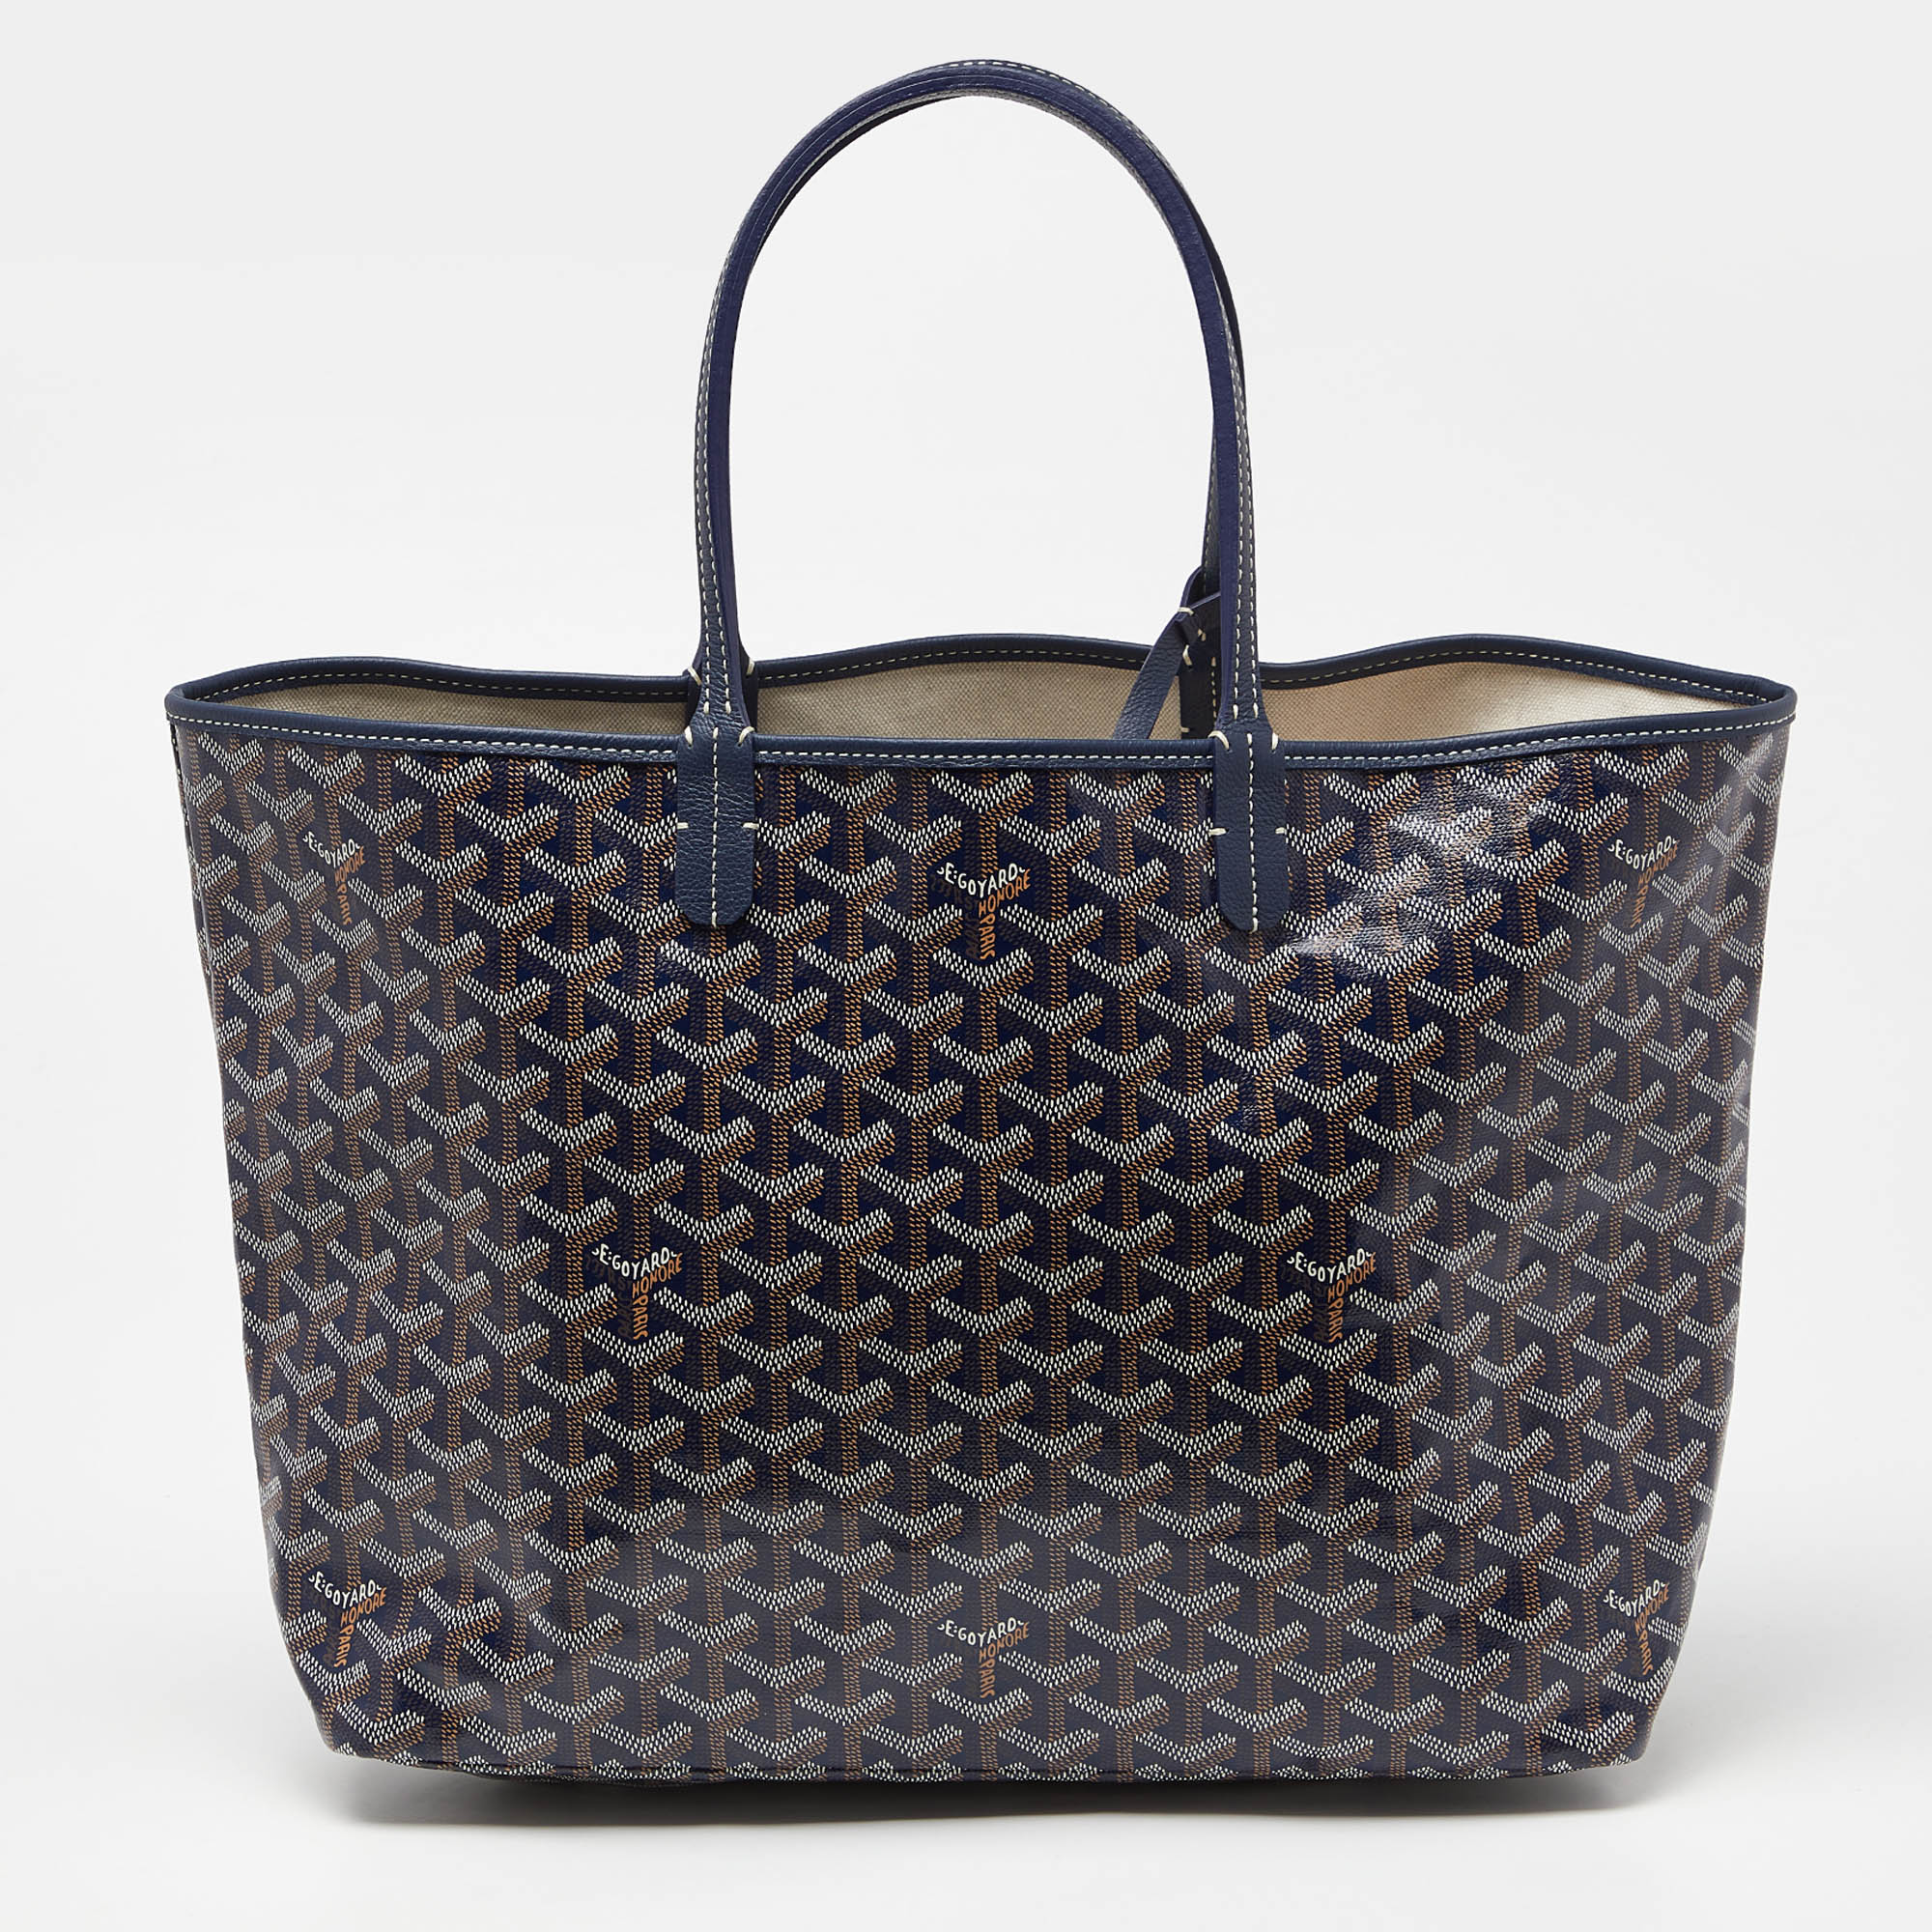 Handbags are more than just instruments to carry ones essentials. They express a womans sense of style and the better the bag the more confidence she gets when she holds it. Goyard brings you one such bag meticulously made from Goyardine canvas and leather trims. The Saint Louis PM tote has a spacious fabric interior two handles and a small pouch.